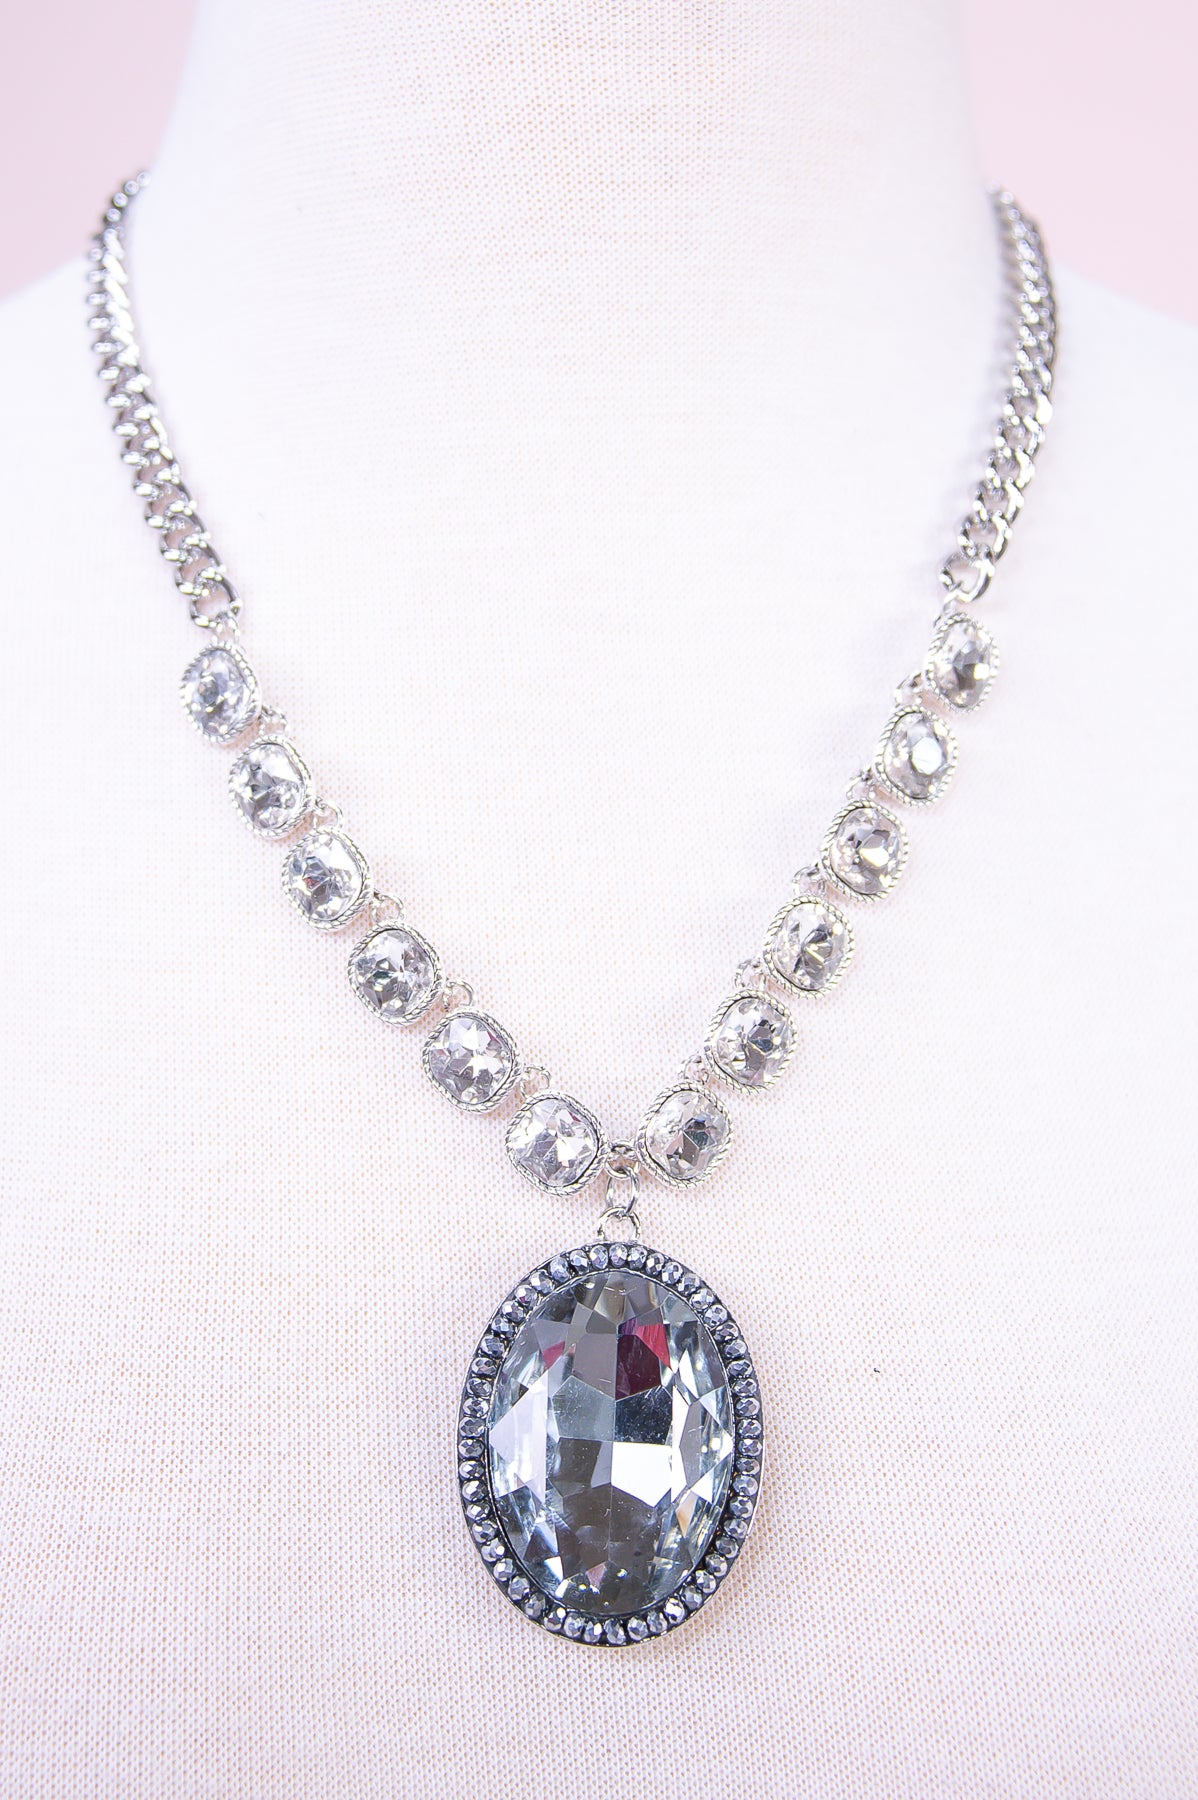 Silver/Clear Chain Link Bling Pendant Necklace - NEK4342SI